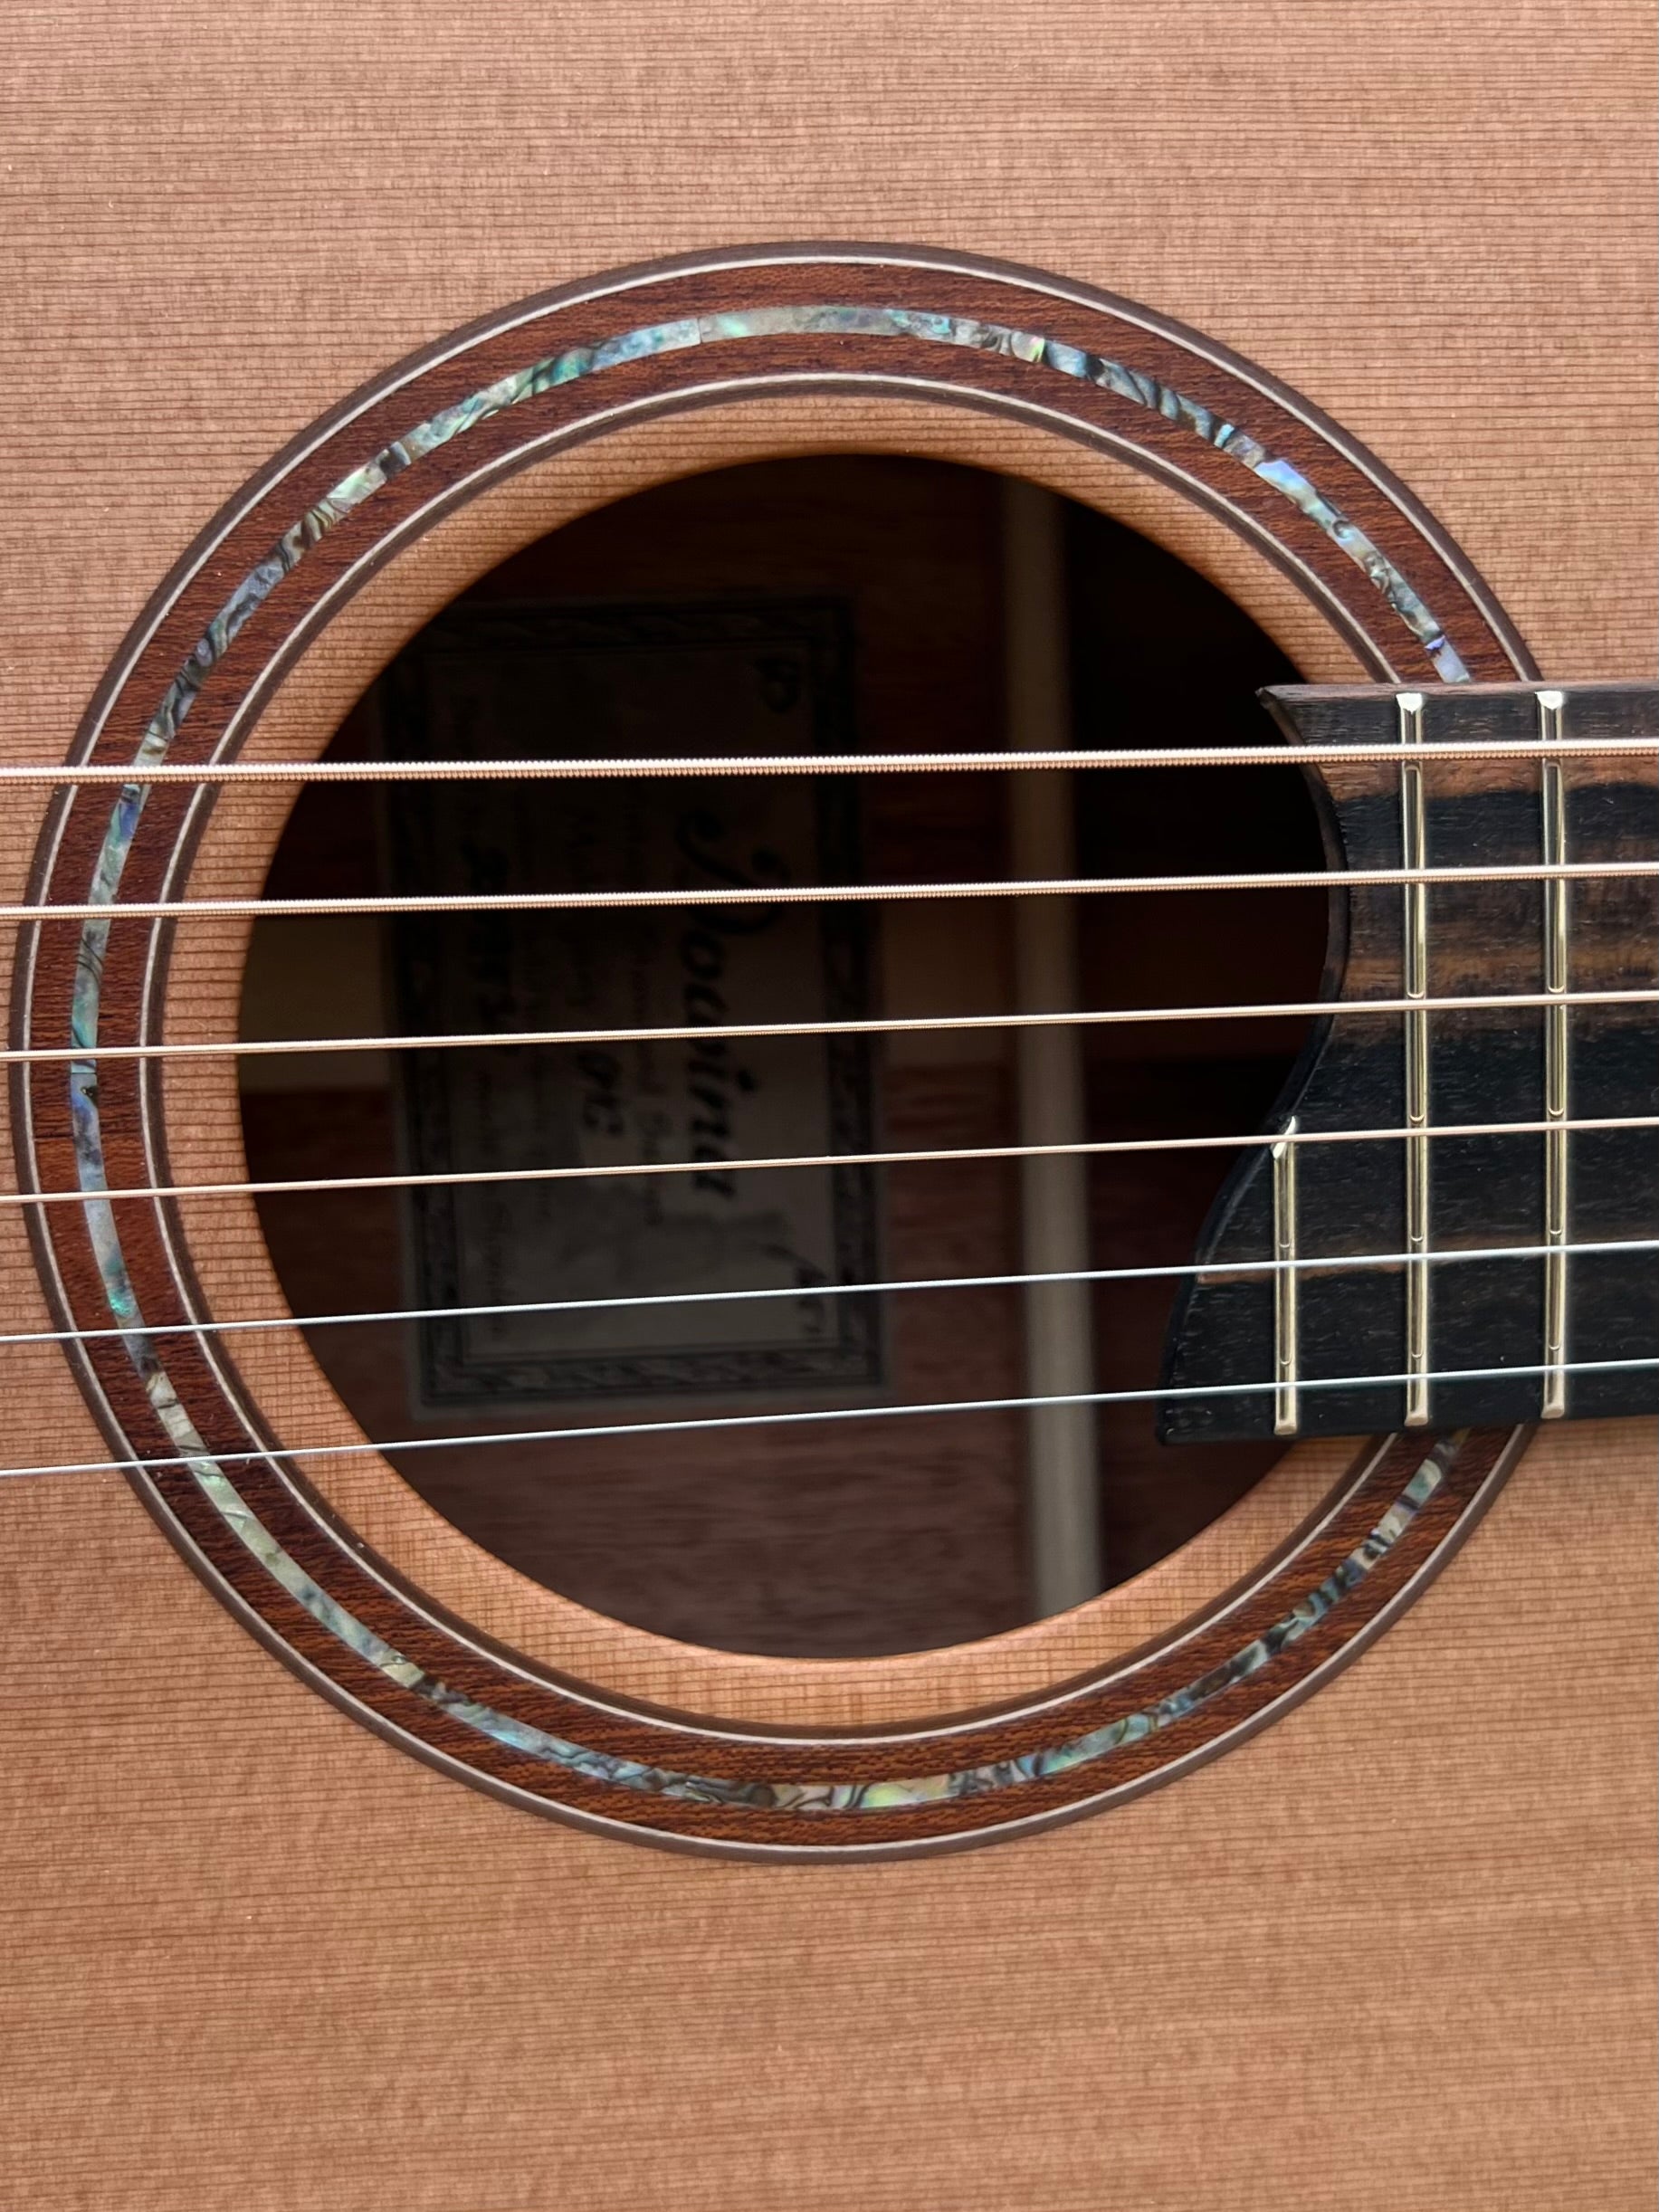 Dowina Mahogany OMG OM Body Acoustic Guitar, Acoustic Guitar for sale at Richards Guitars.